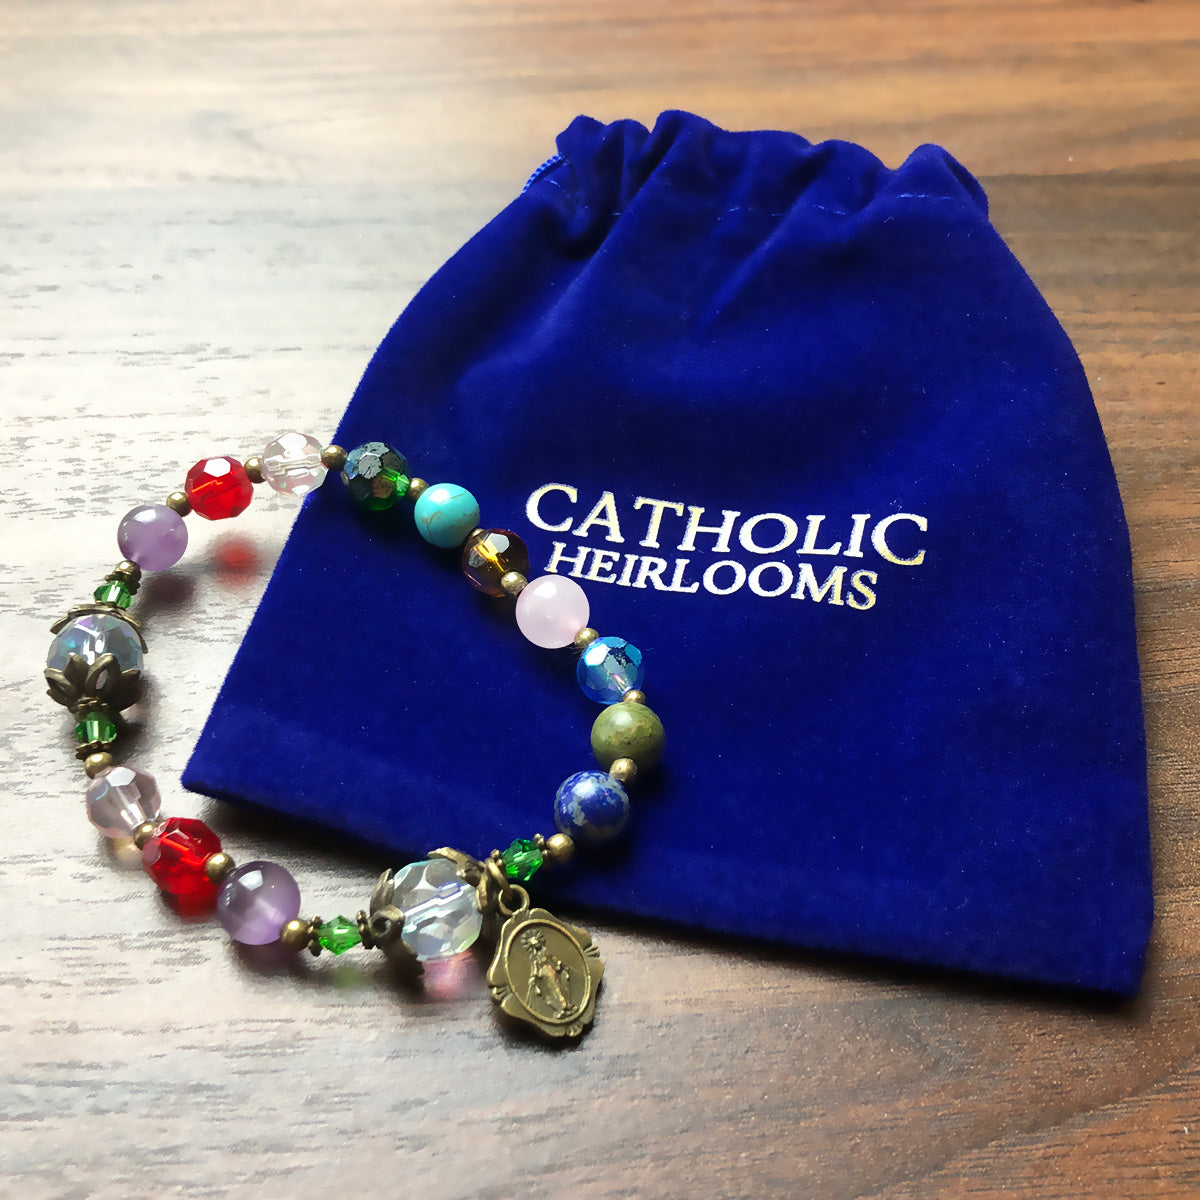 Basilica Window Crystal and Stone Rosary Bracelet by Catholic Heirlooms - Confirmation - Holy Communion Gift